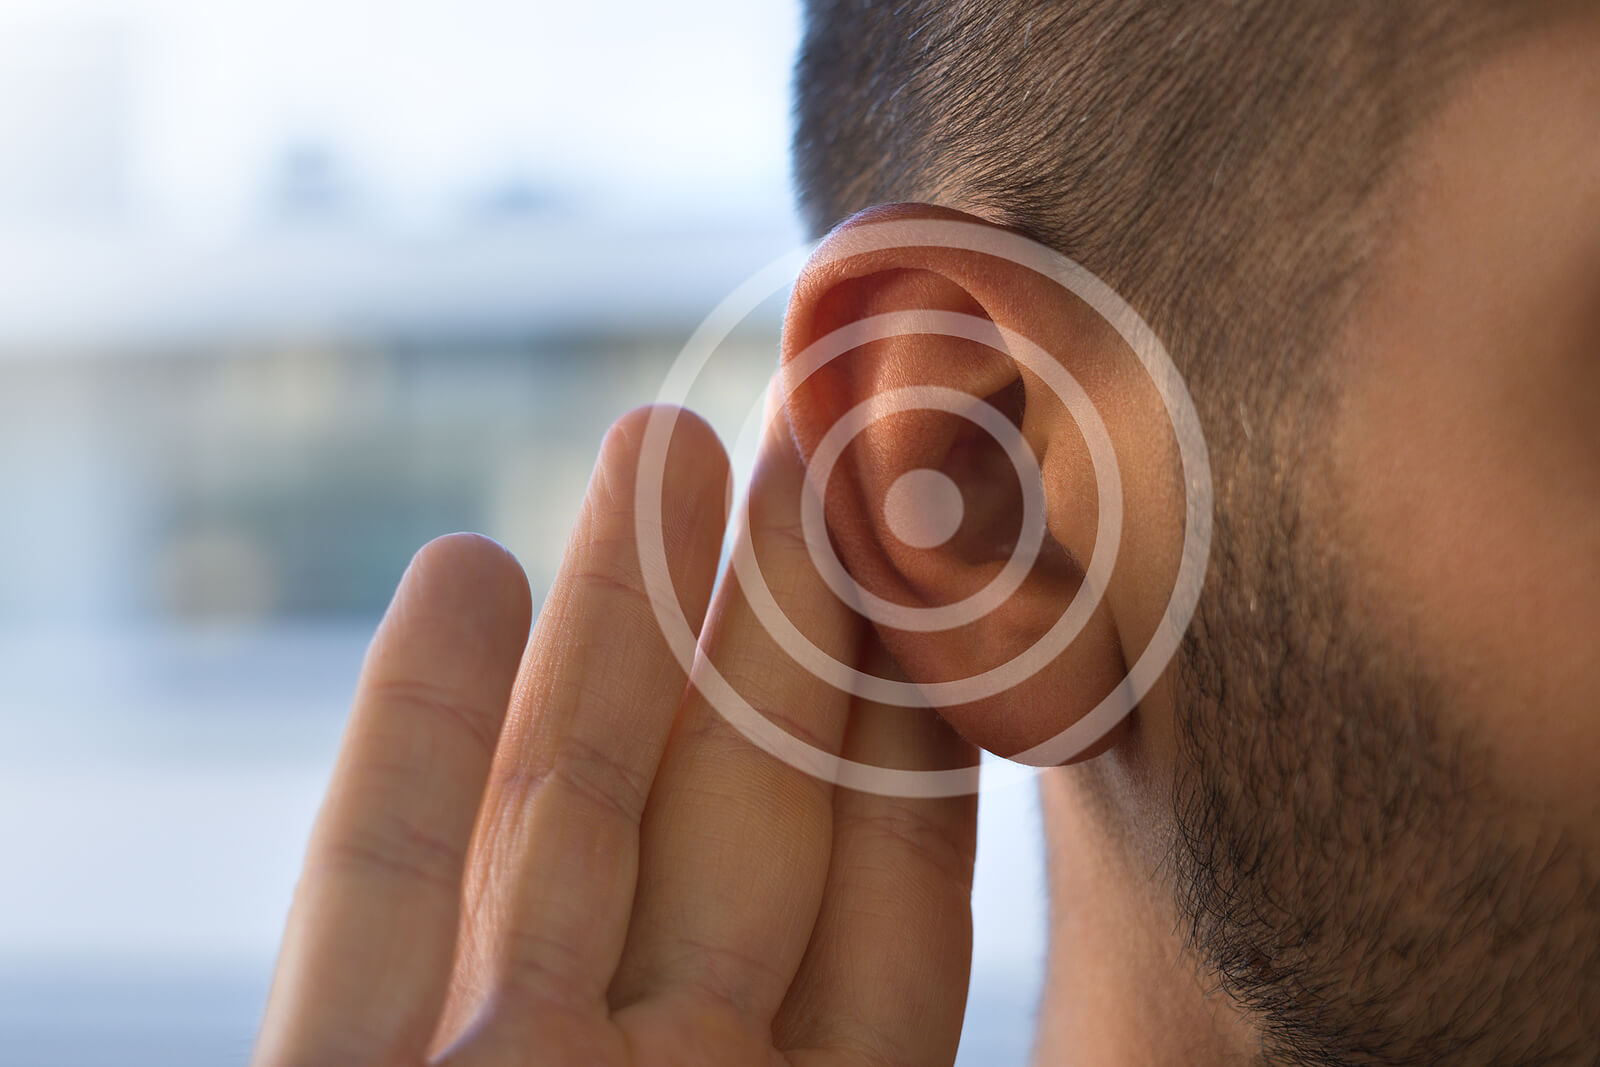 Personal Stories of Living with Tinnitus